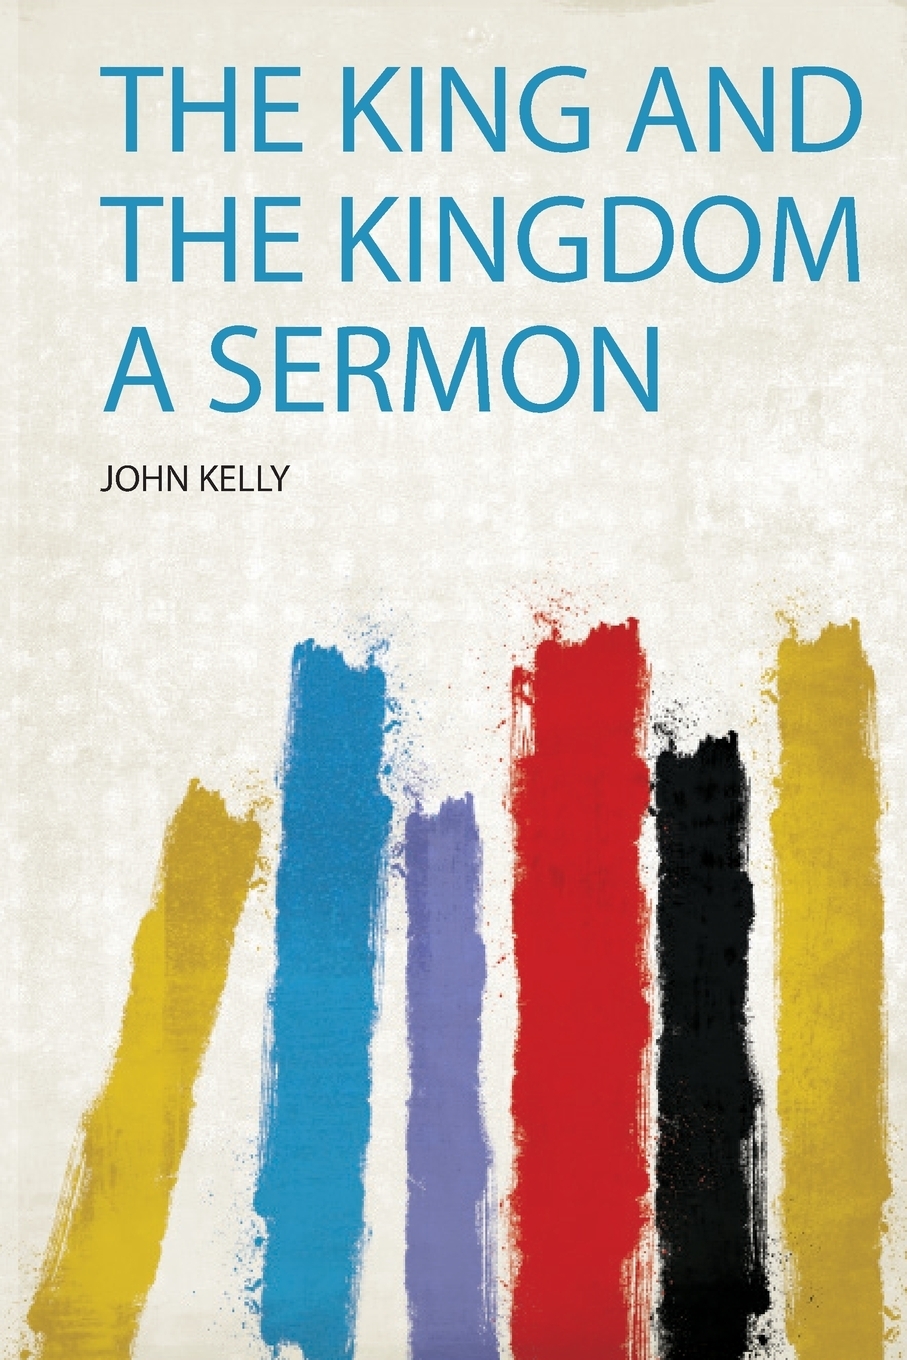 The King and the Kingdom a Sermon